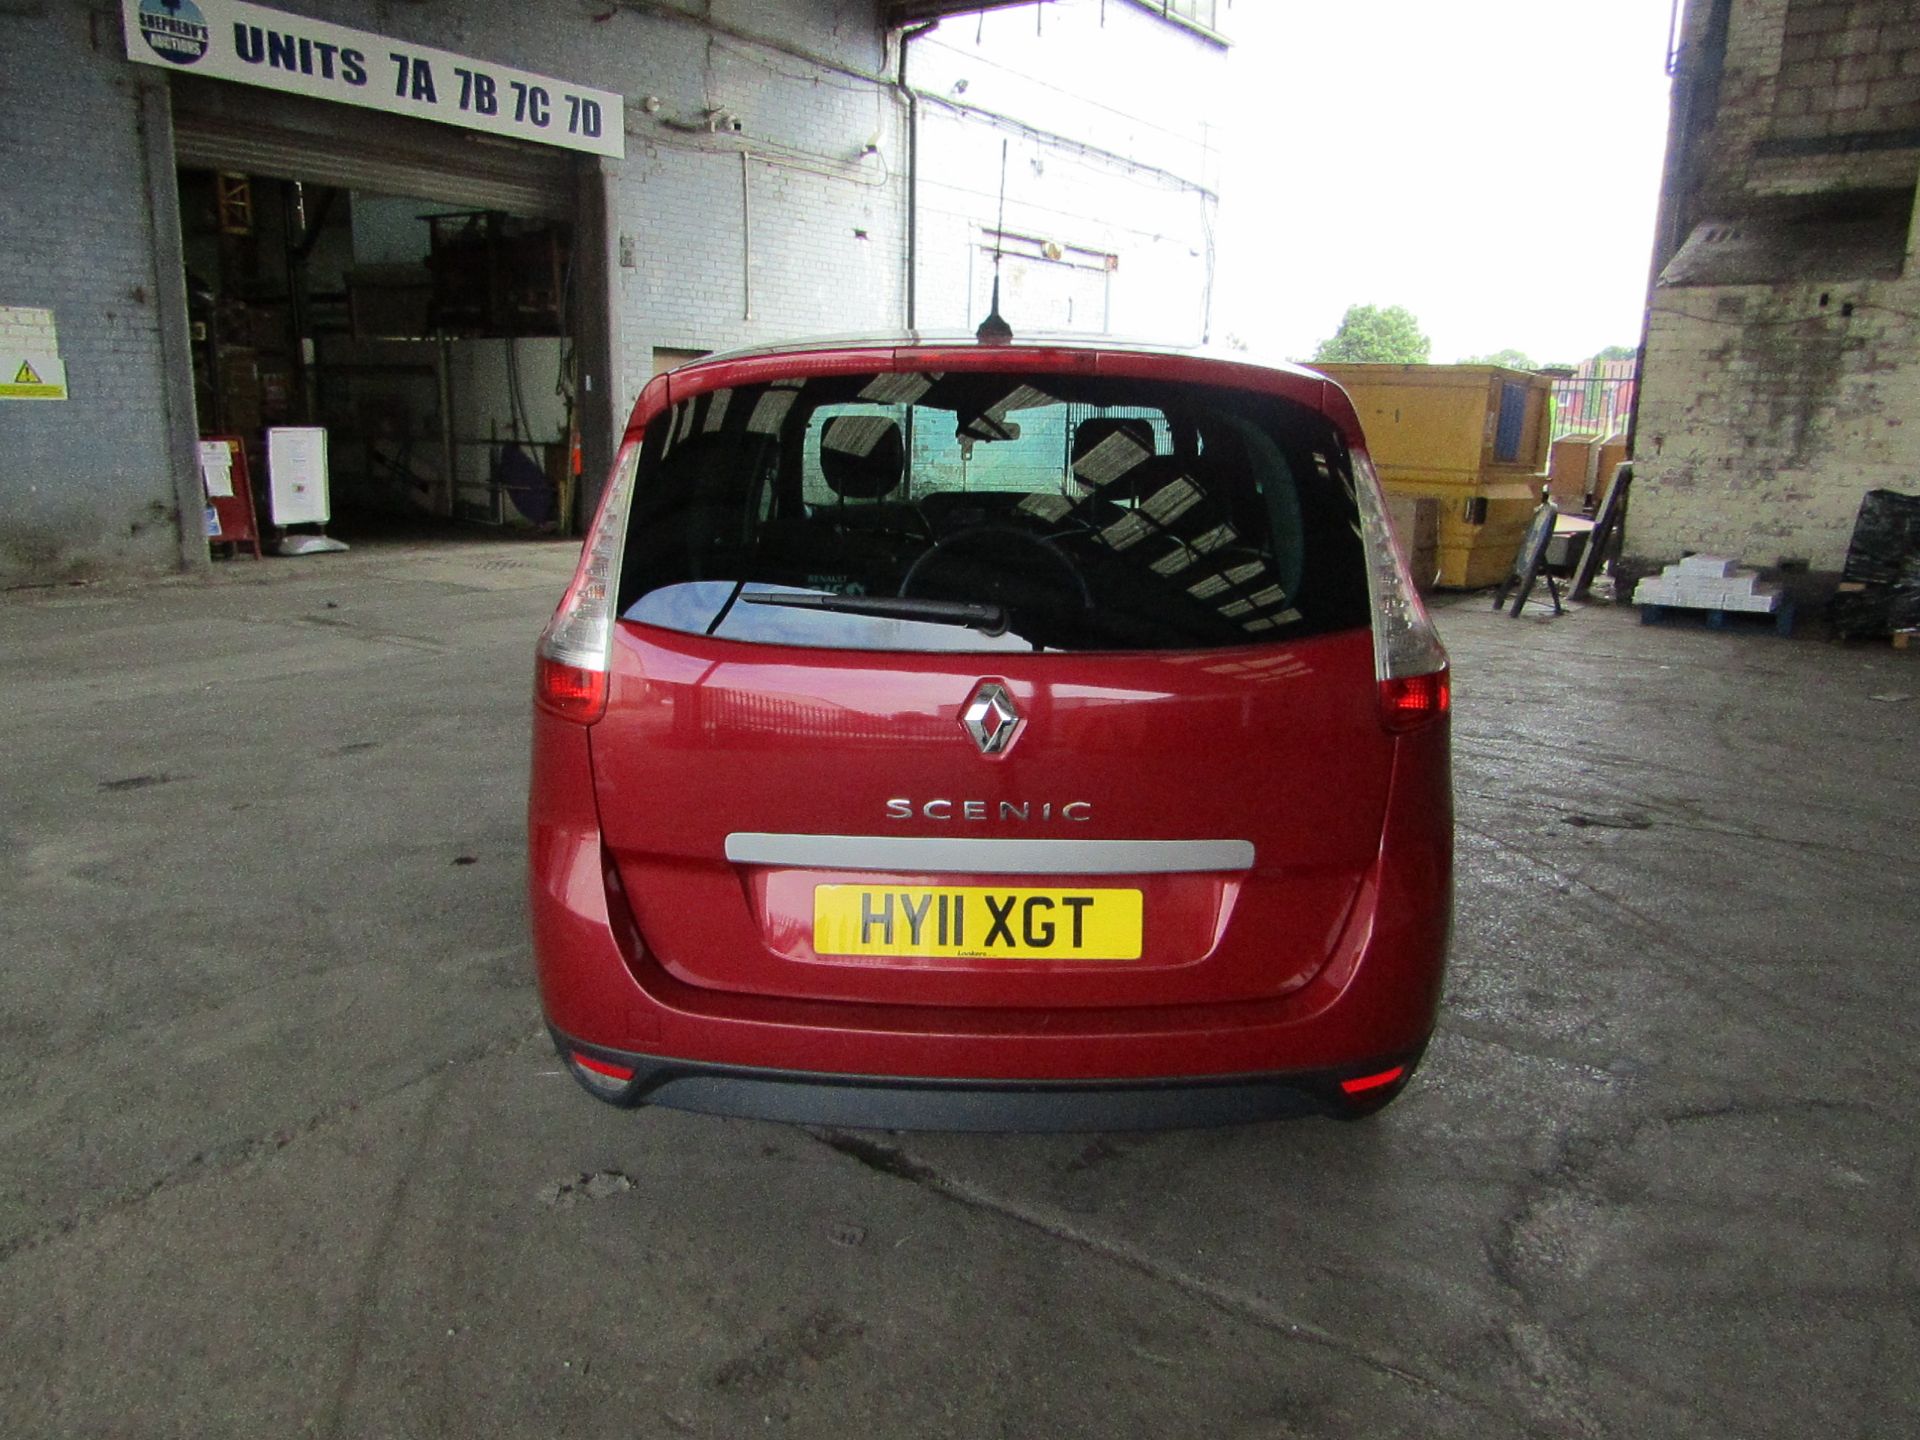 11 Plate Renault Grand Scenic 1.6 VVTi Dynamique Tom Tom 7 seats, CAT N (recorded as such 12/02/ - Image 5 of 44